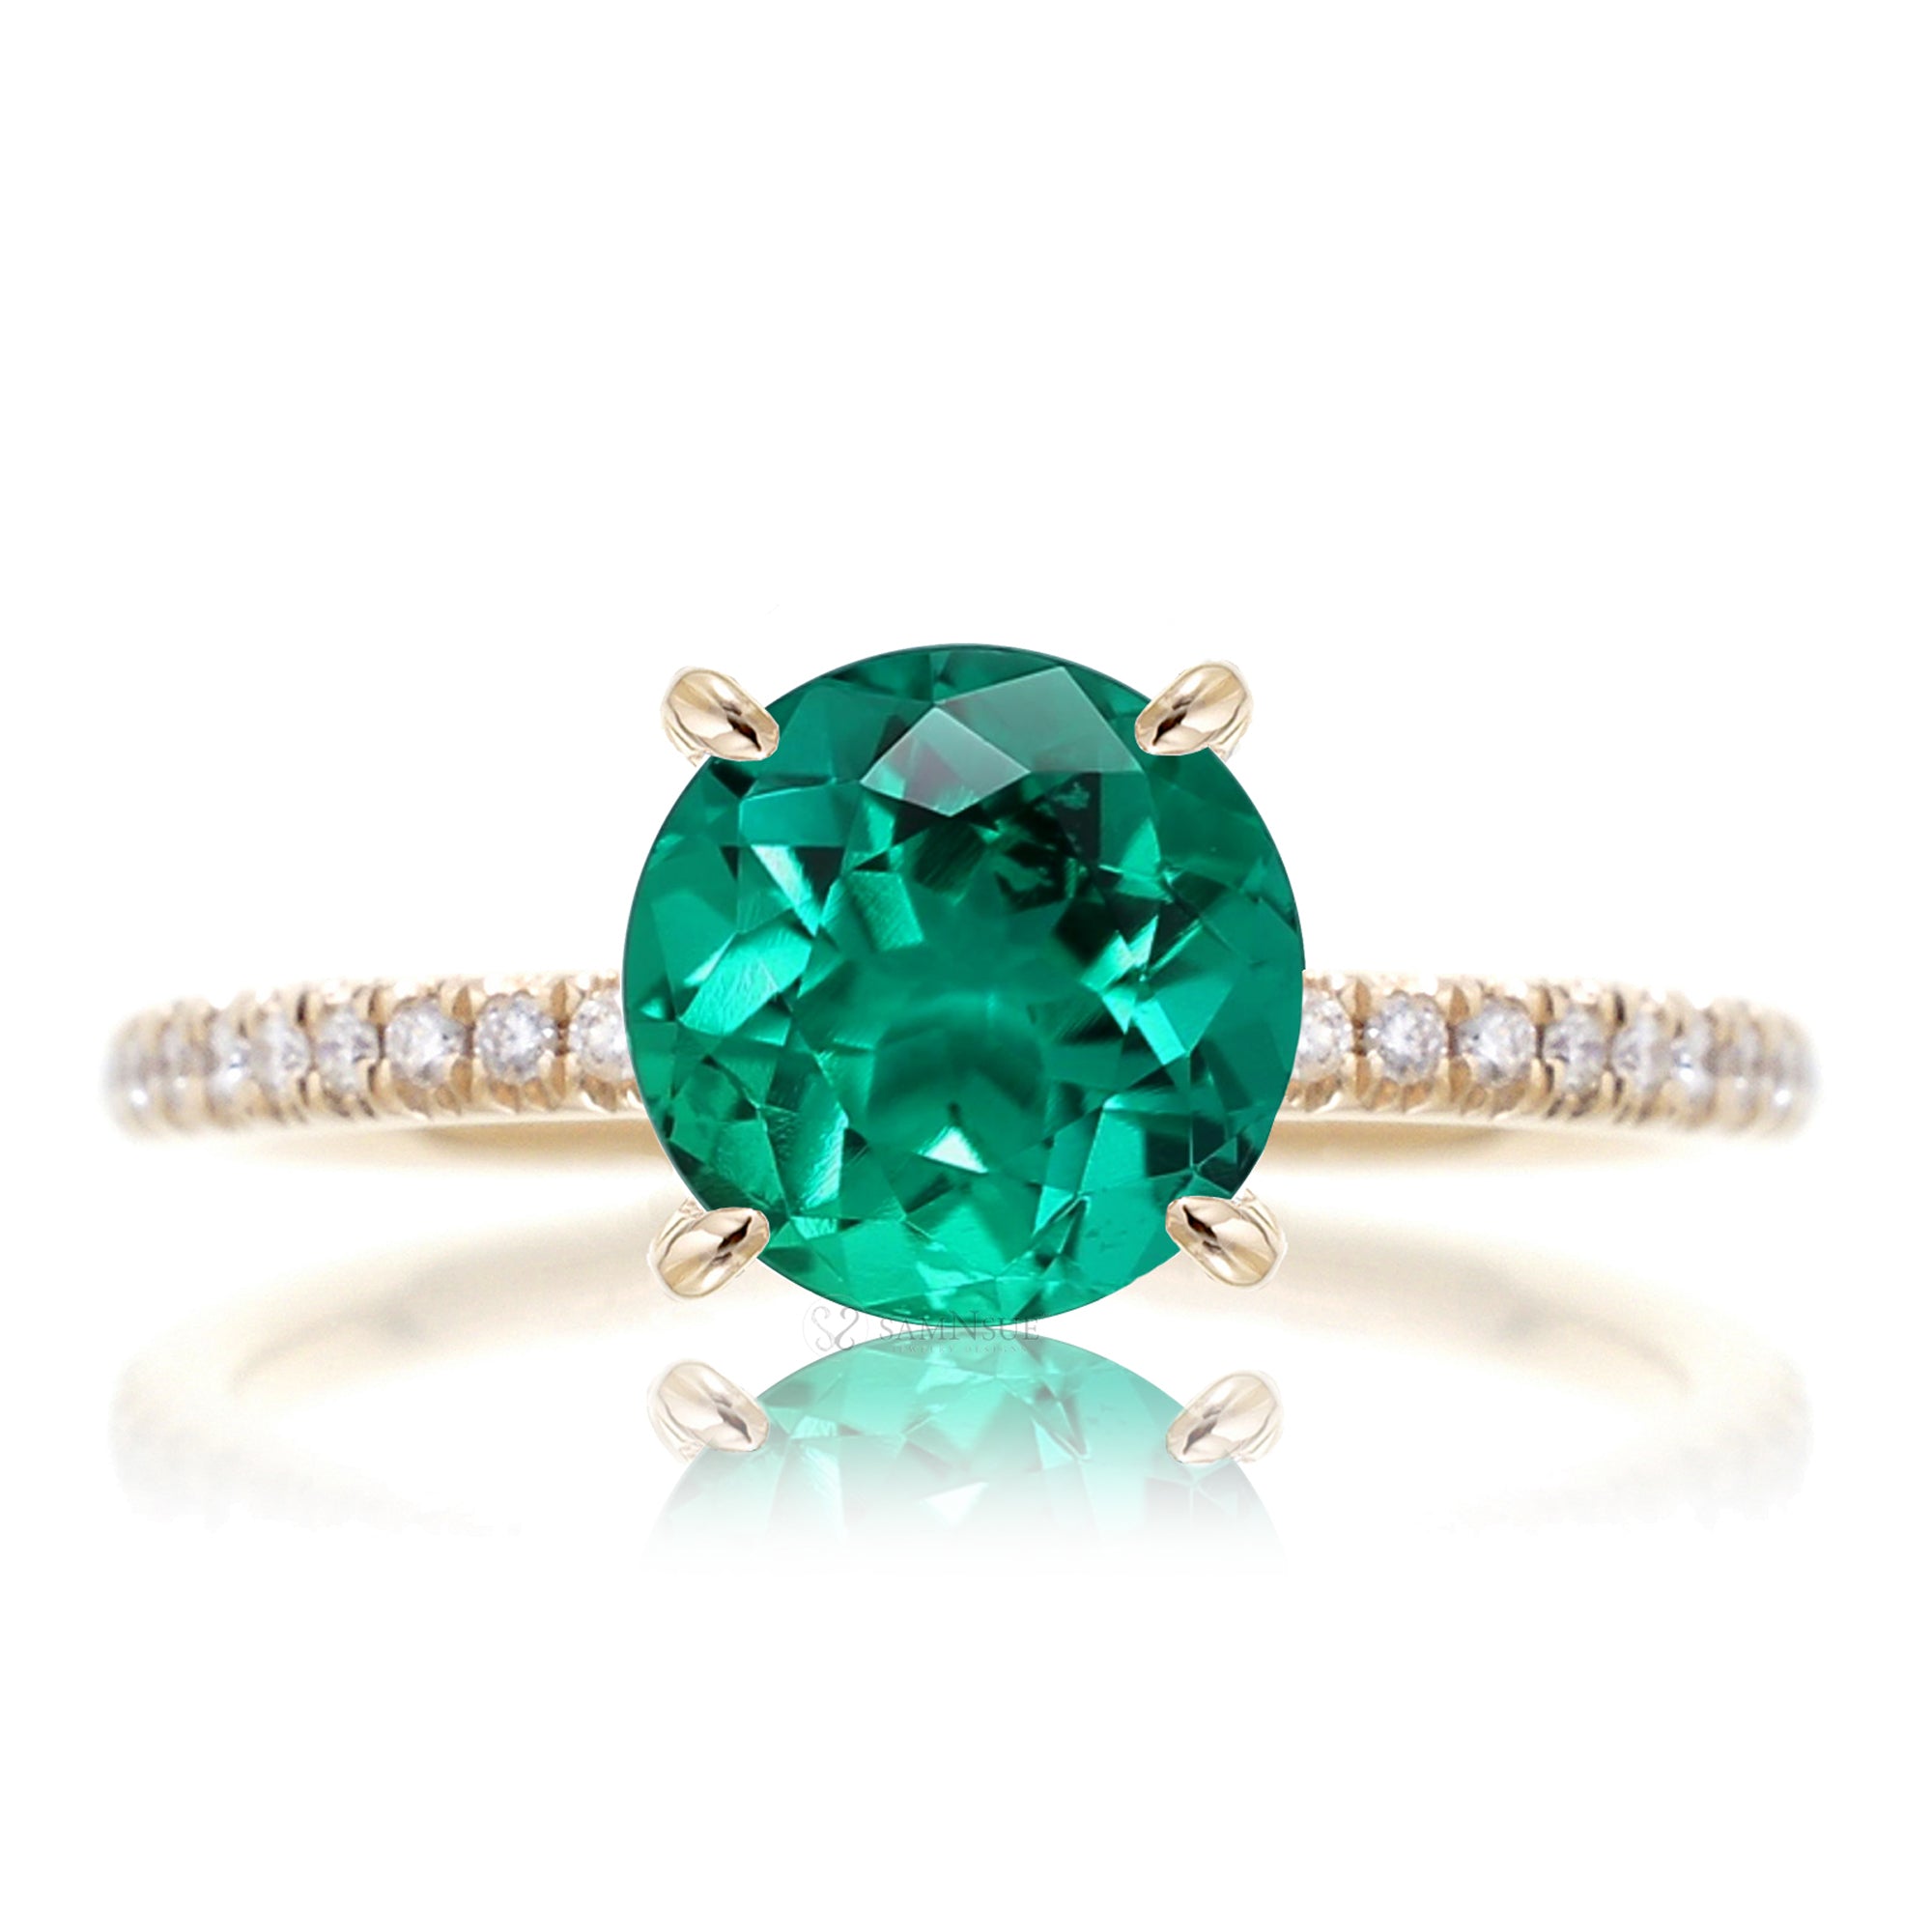 The Ava Round Green Emerald (Lab Grown)